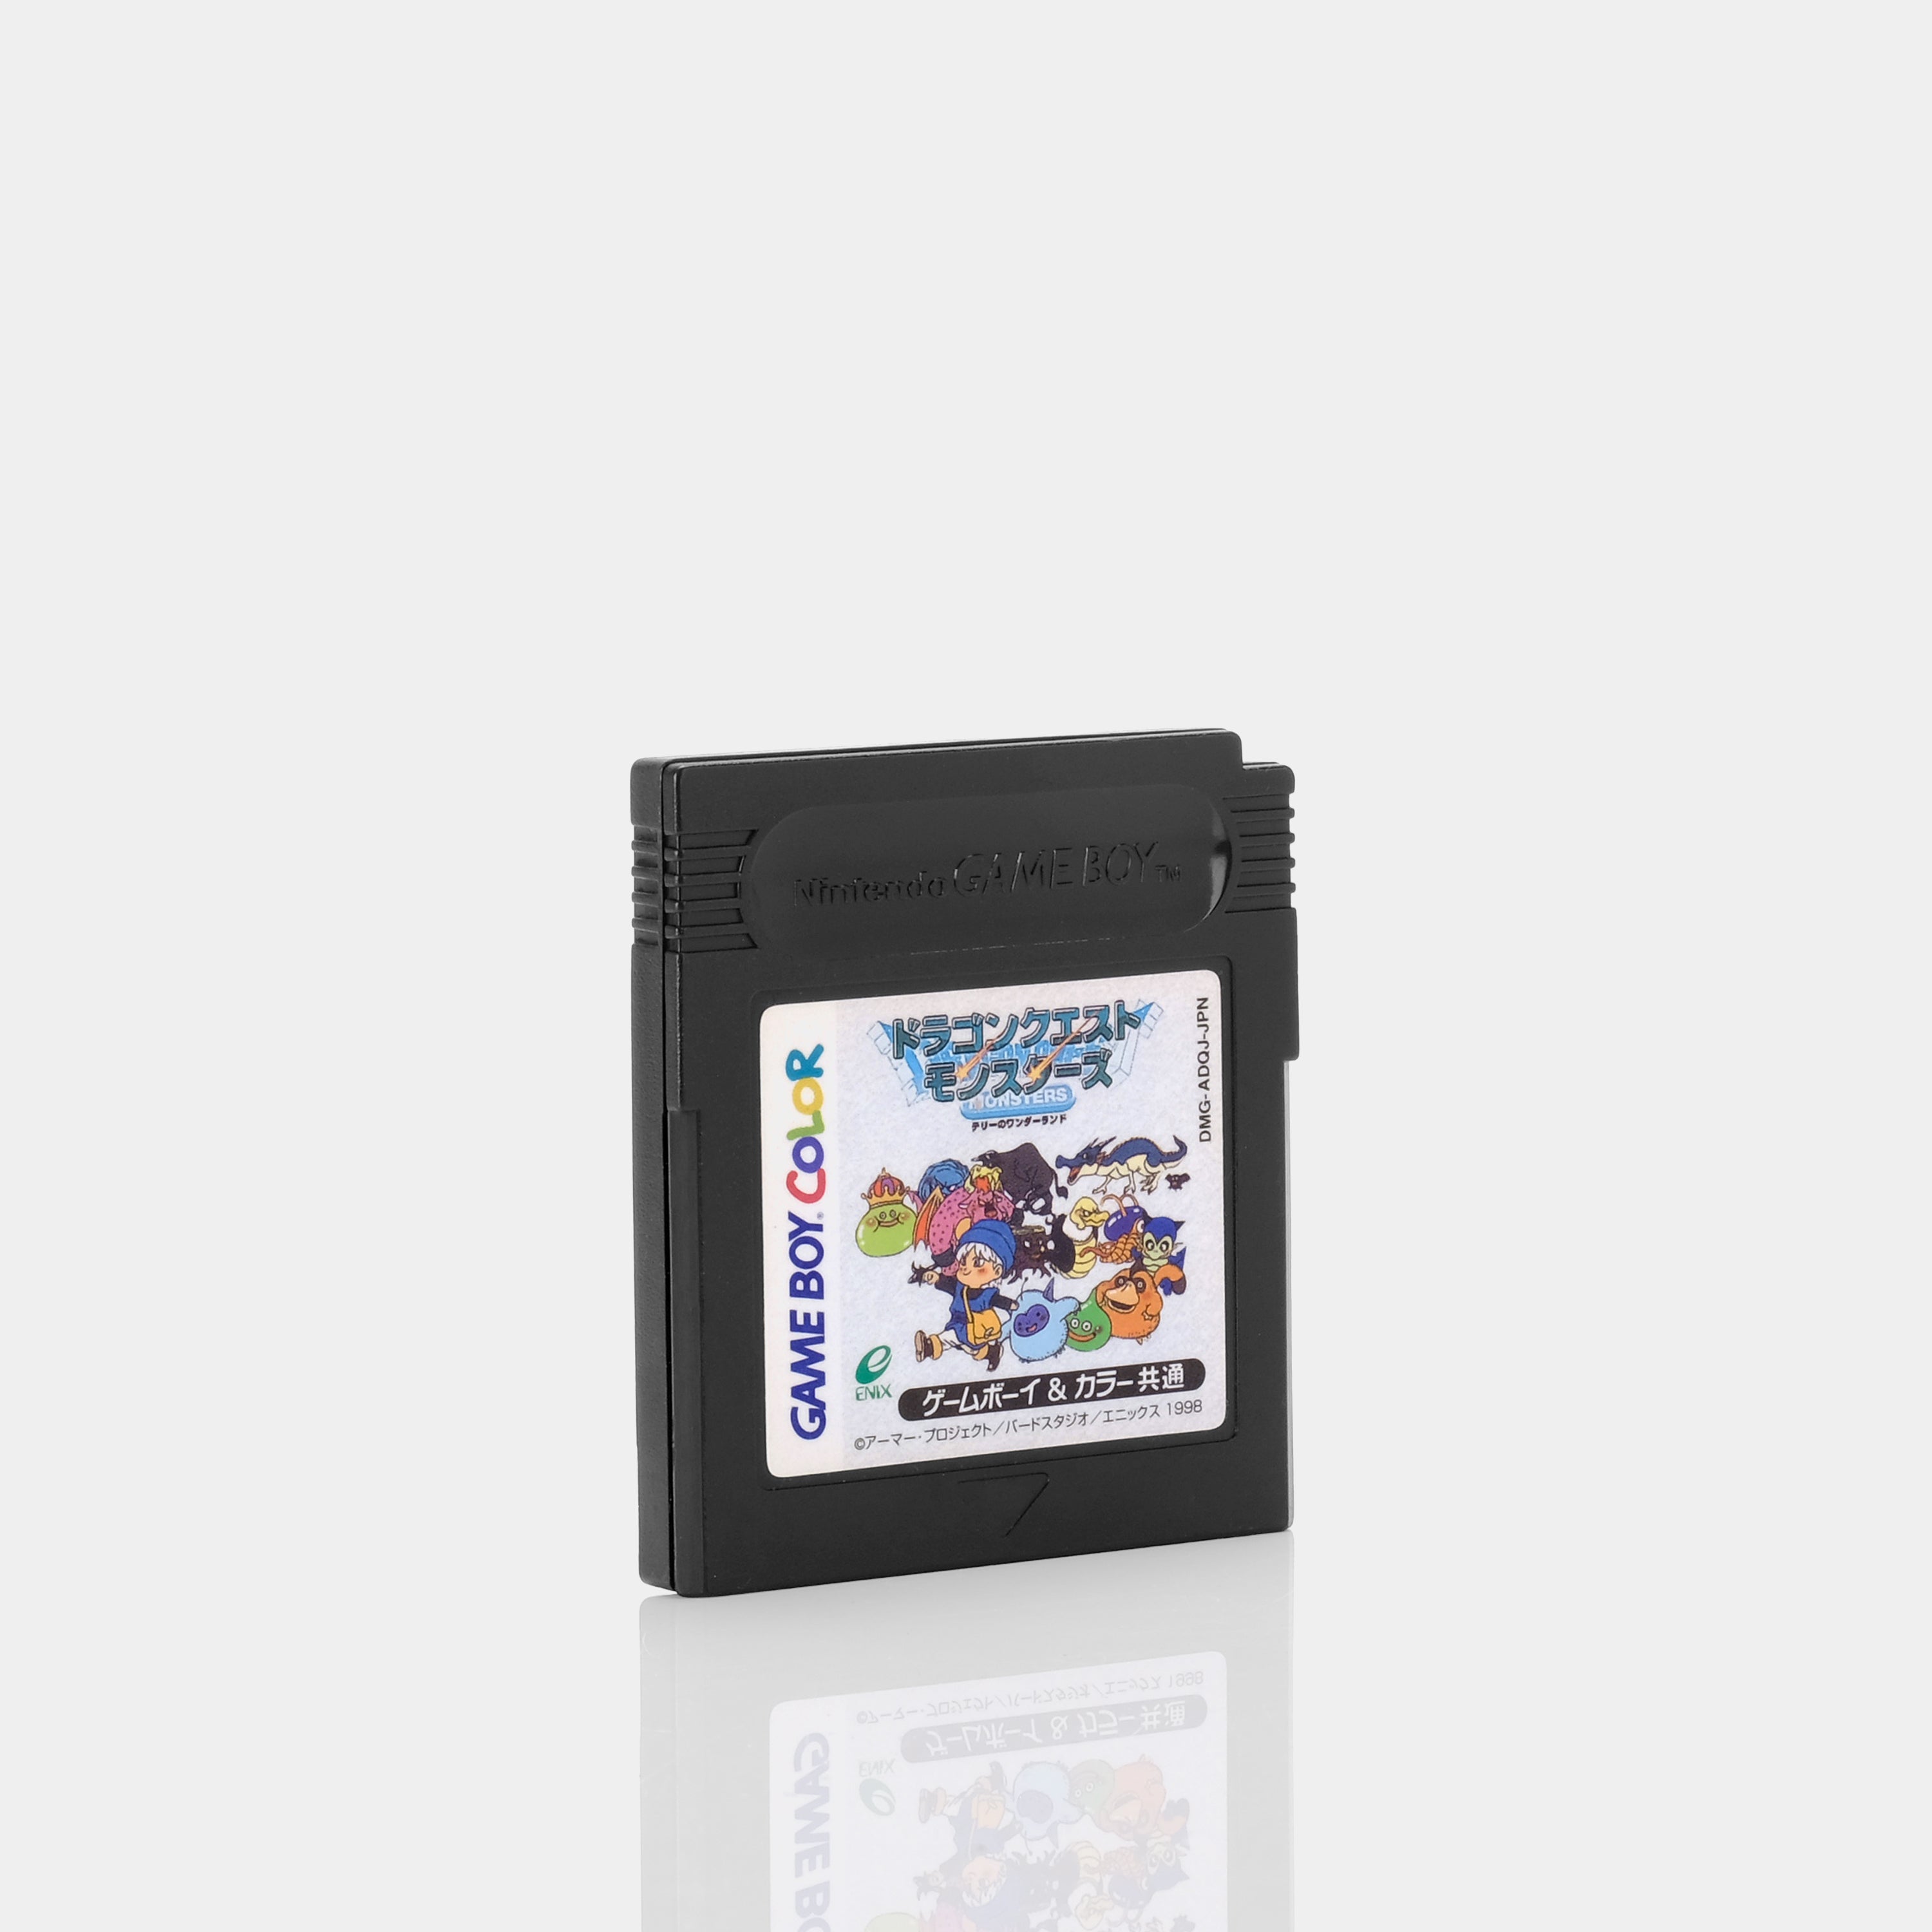 Dragon Quest Monsters ドラゴンクエストモンスターズ (Japanese Version) Game Boy Color Game